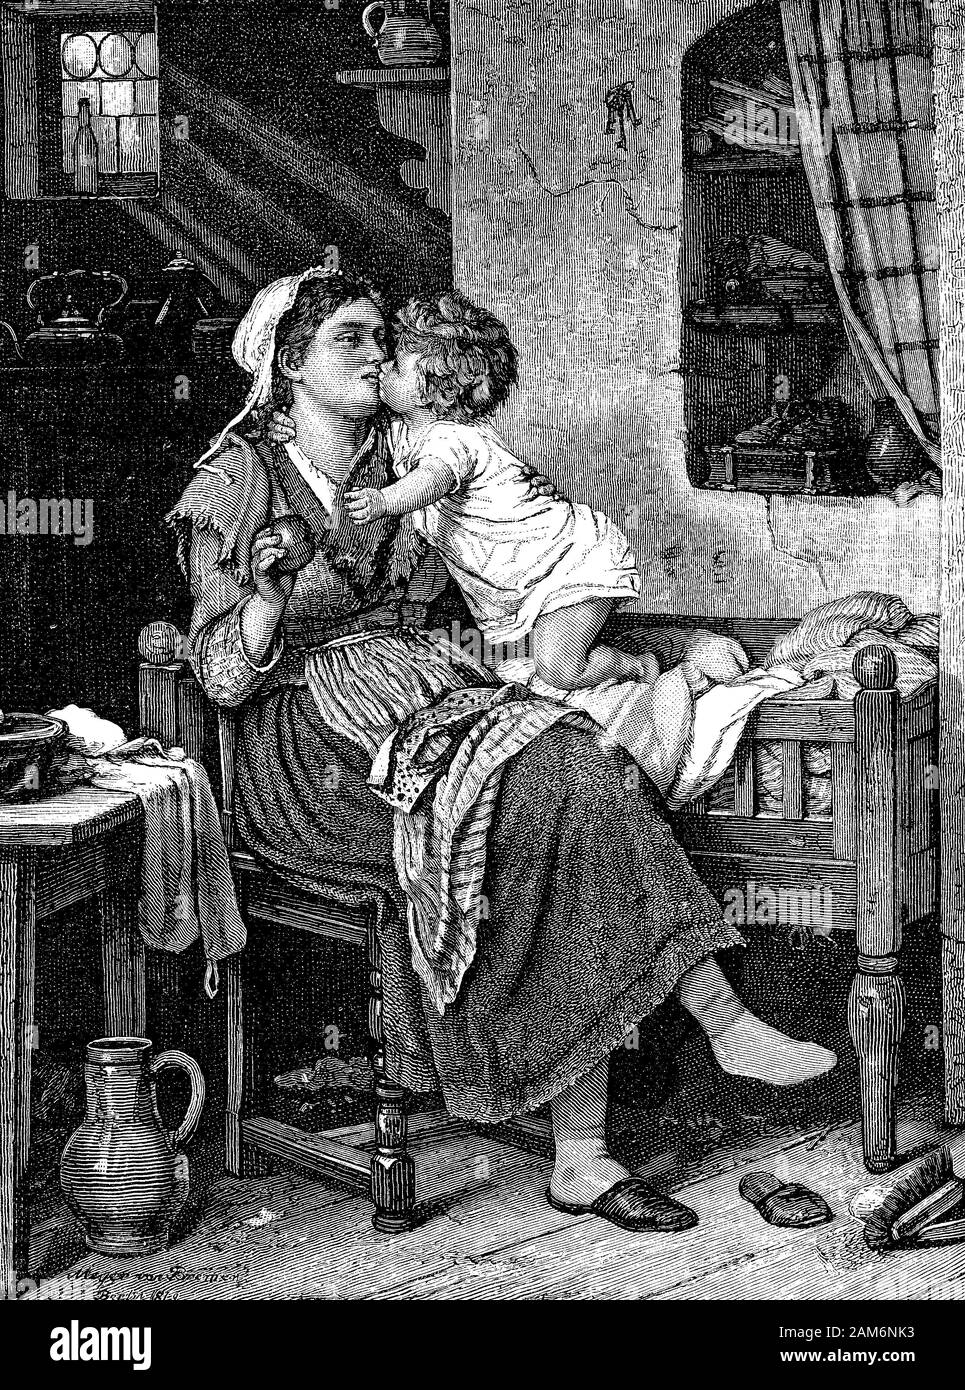 Before a kiss! mother asks her toddler for a kiss before giving him an apple. Cute homely family scene in a rural home. Stock Photo